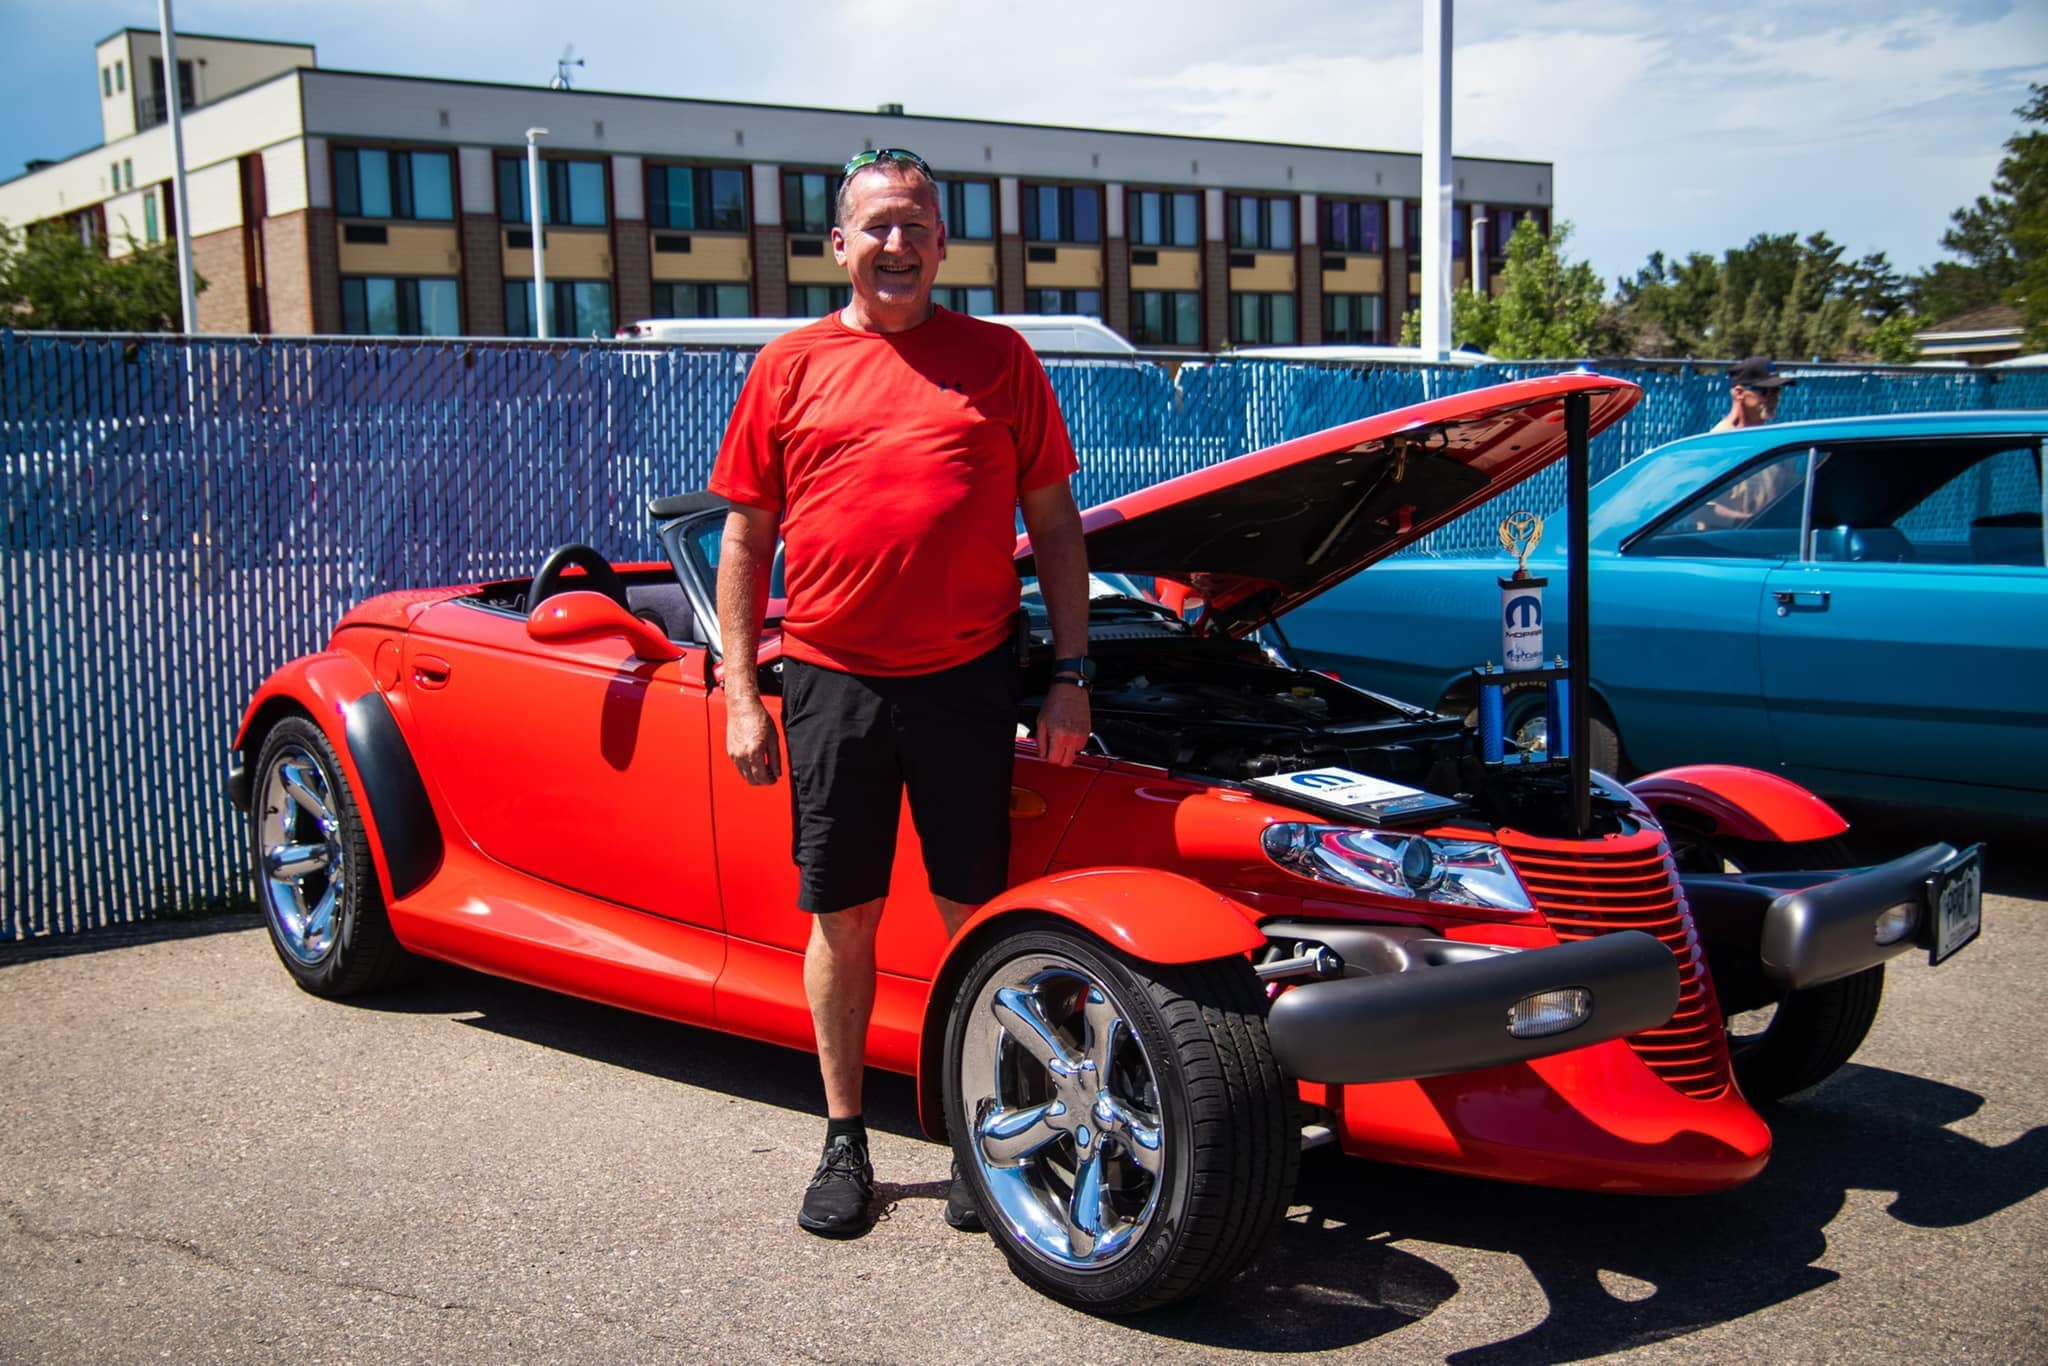 The 8TH ANNUAL MOPAR CAR SHOW IN FORT COLLINS FORT COLLINS DODGE